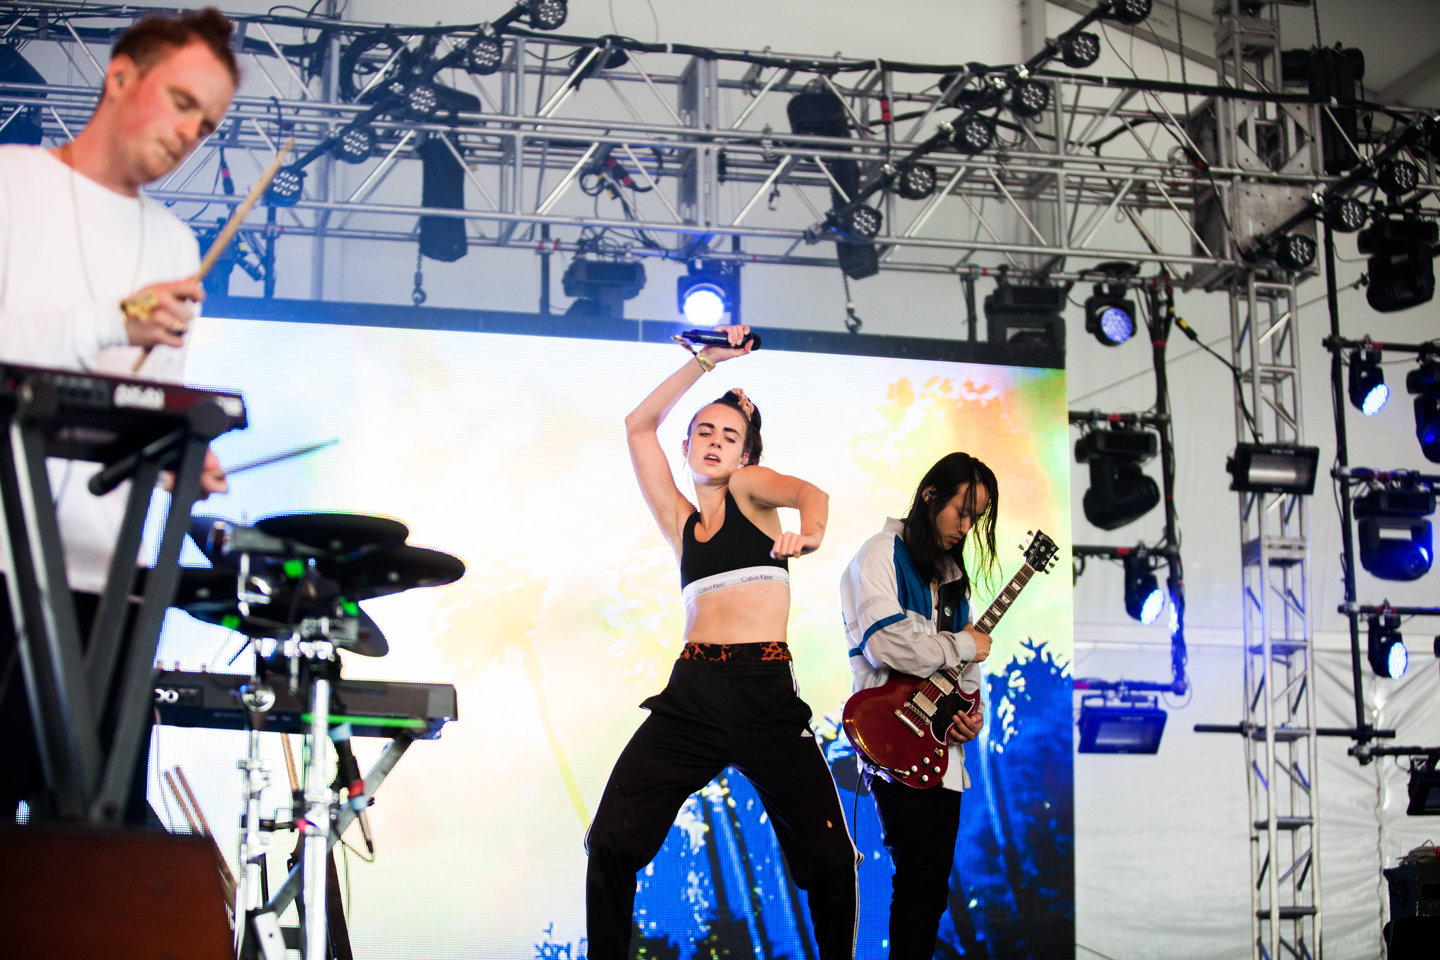 38 Photos That Prove This Year’s Governors Ball Was The Best Yet